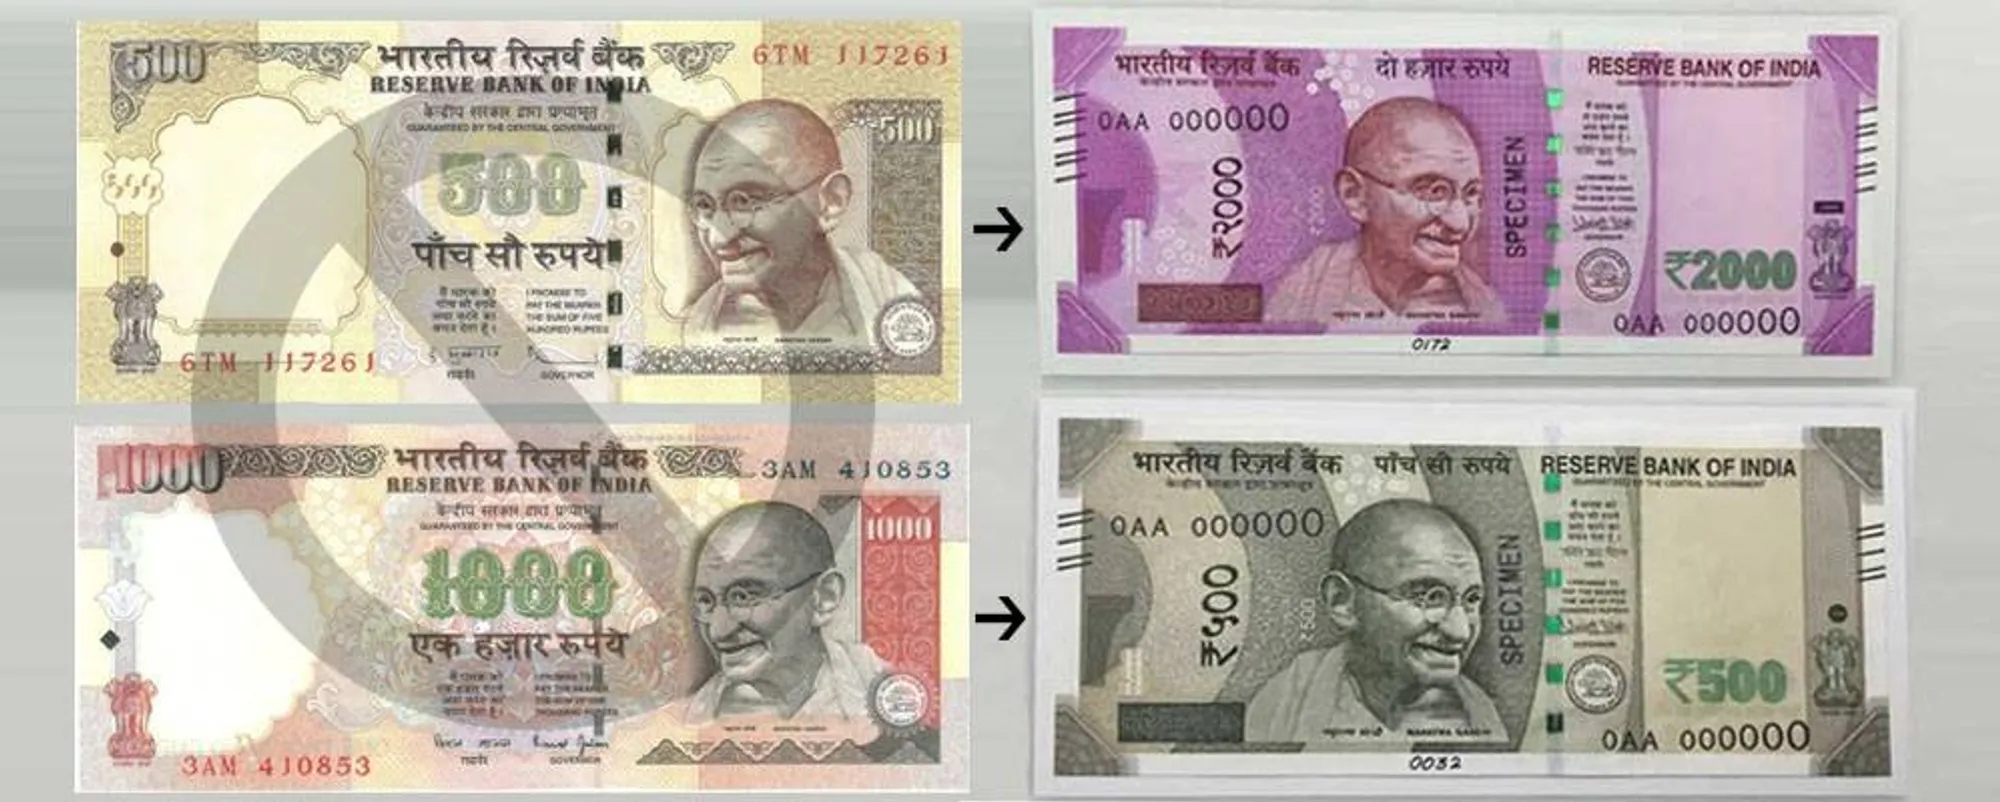 Guidelines for NRIs to change 500 and 1000 rupee notes in India